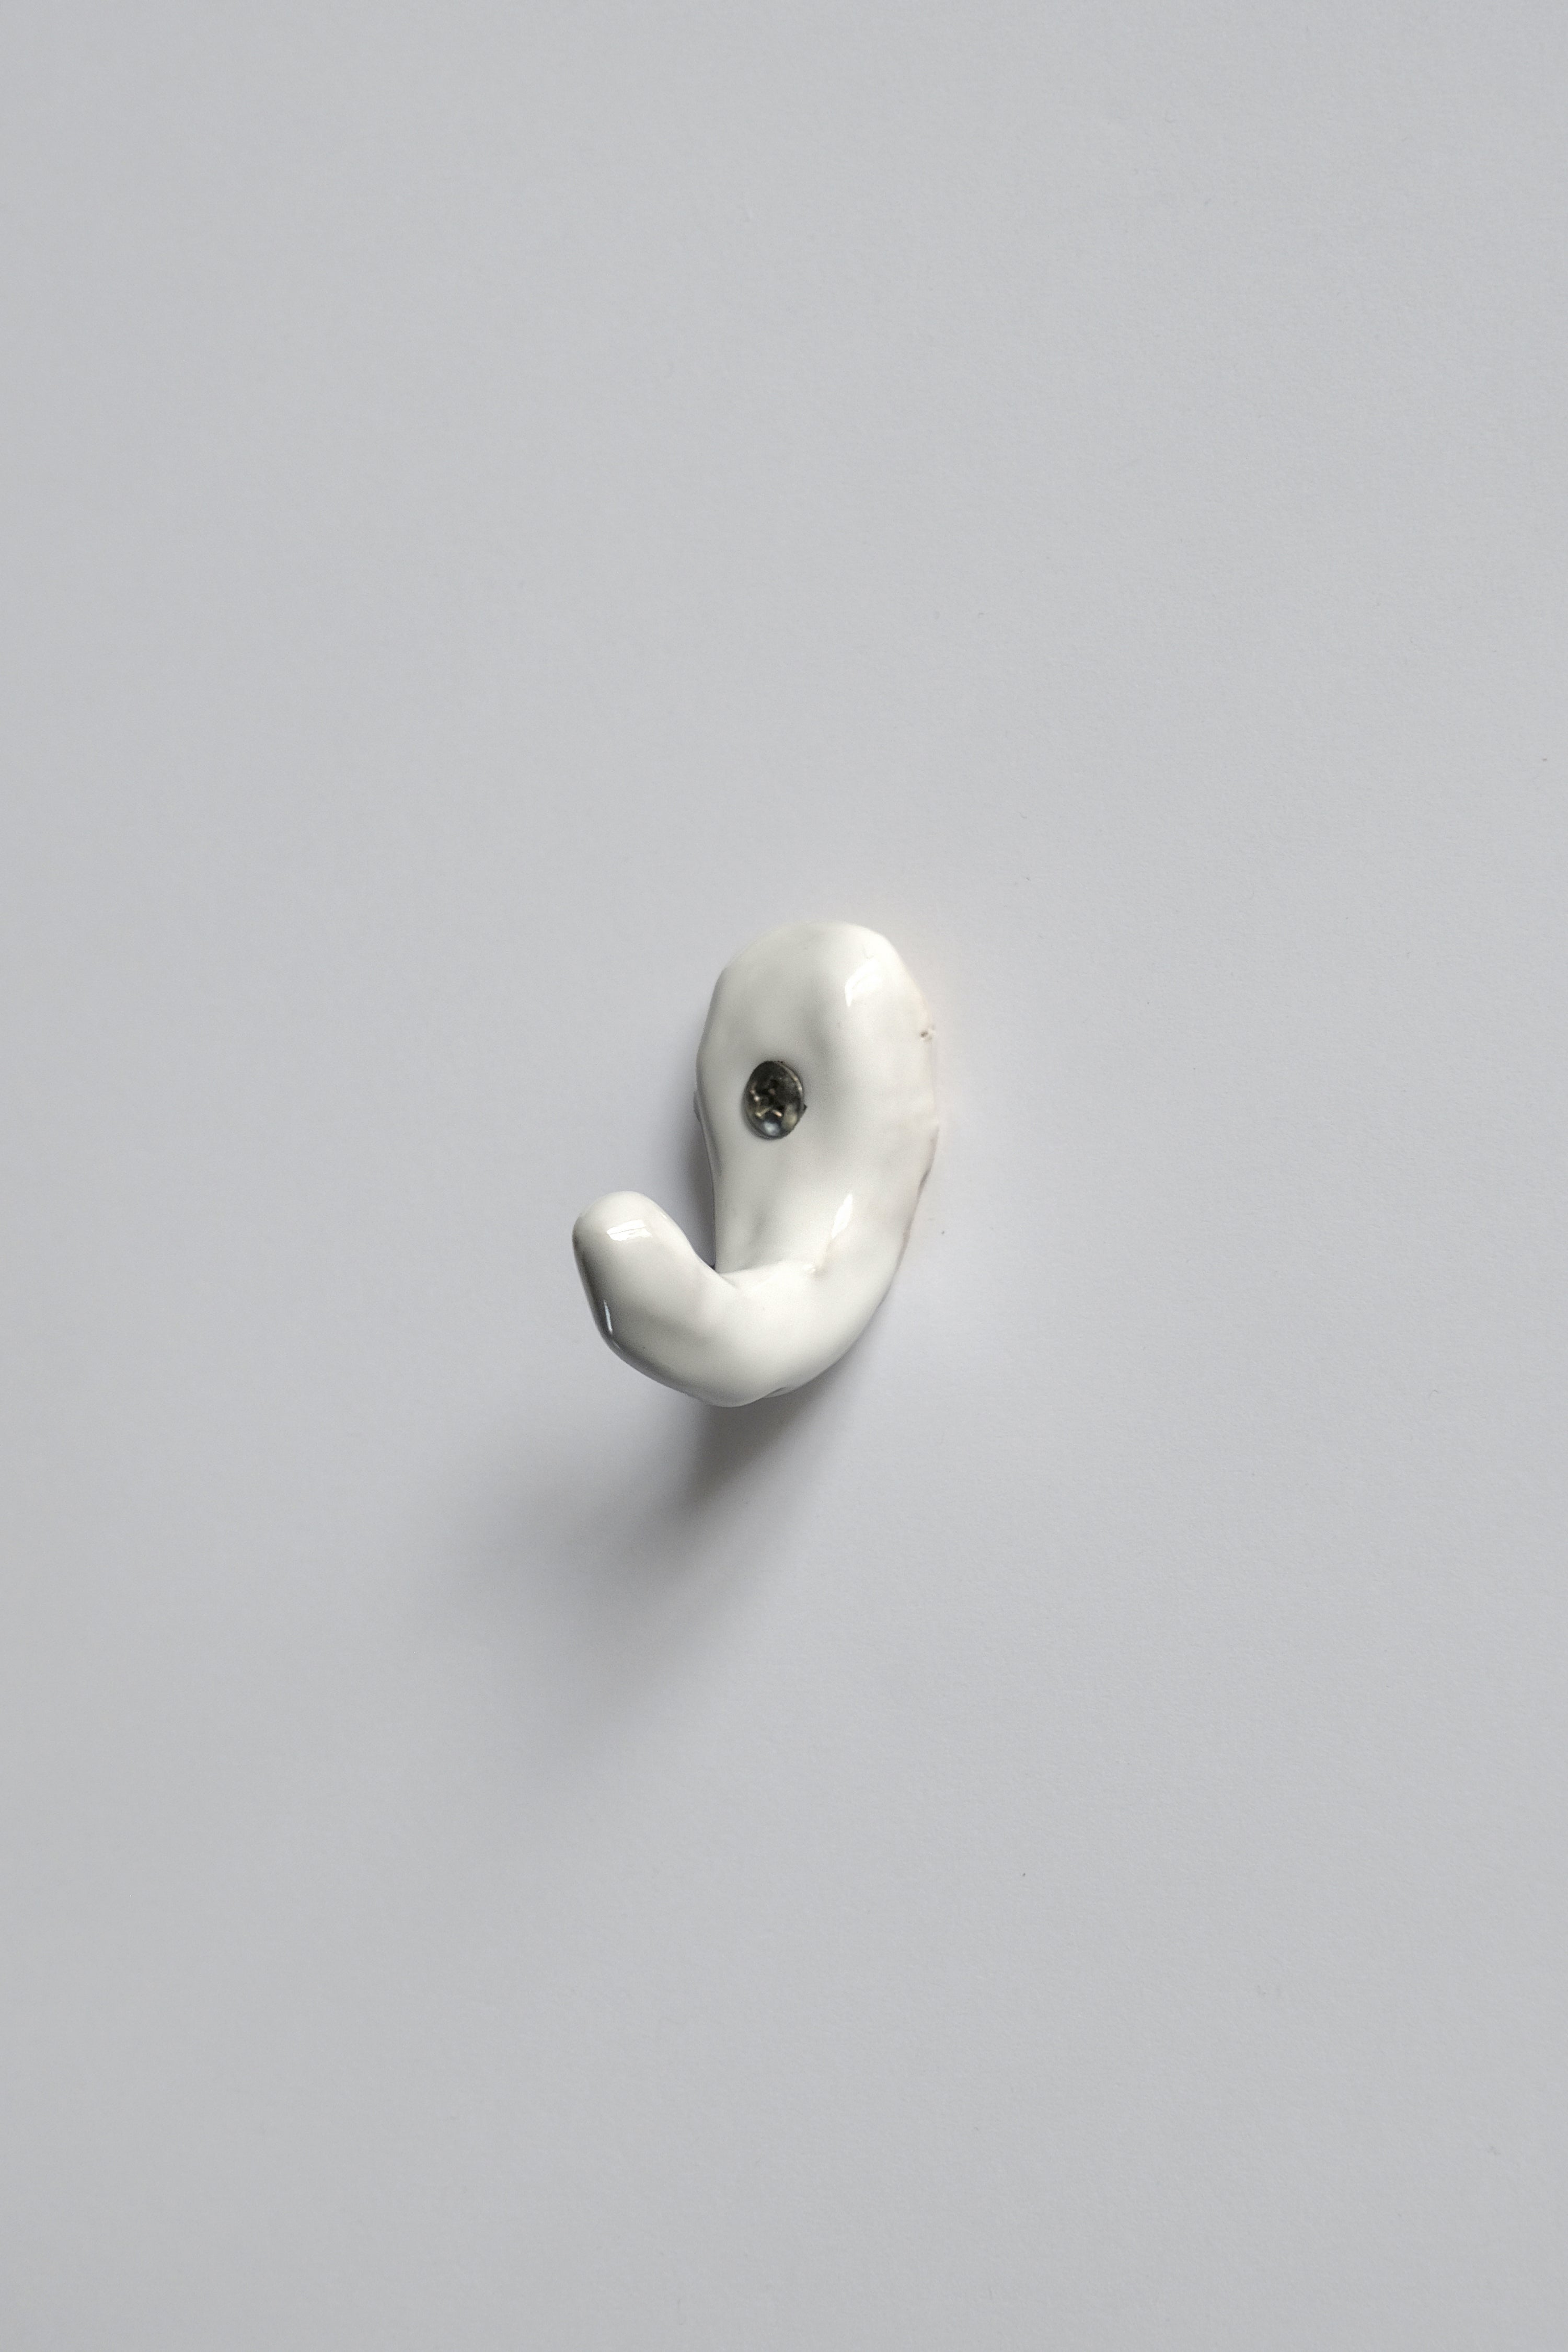 Wall hook small white-Emilie Holm-KIOSK48TH